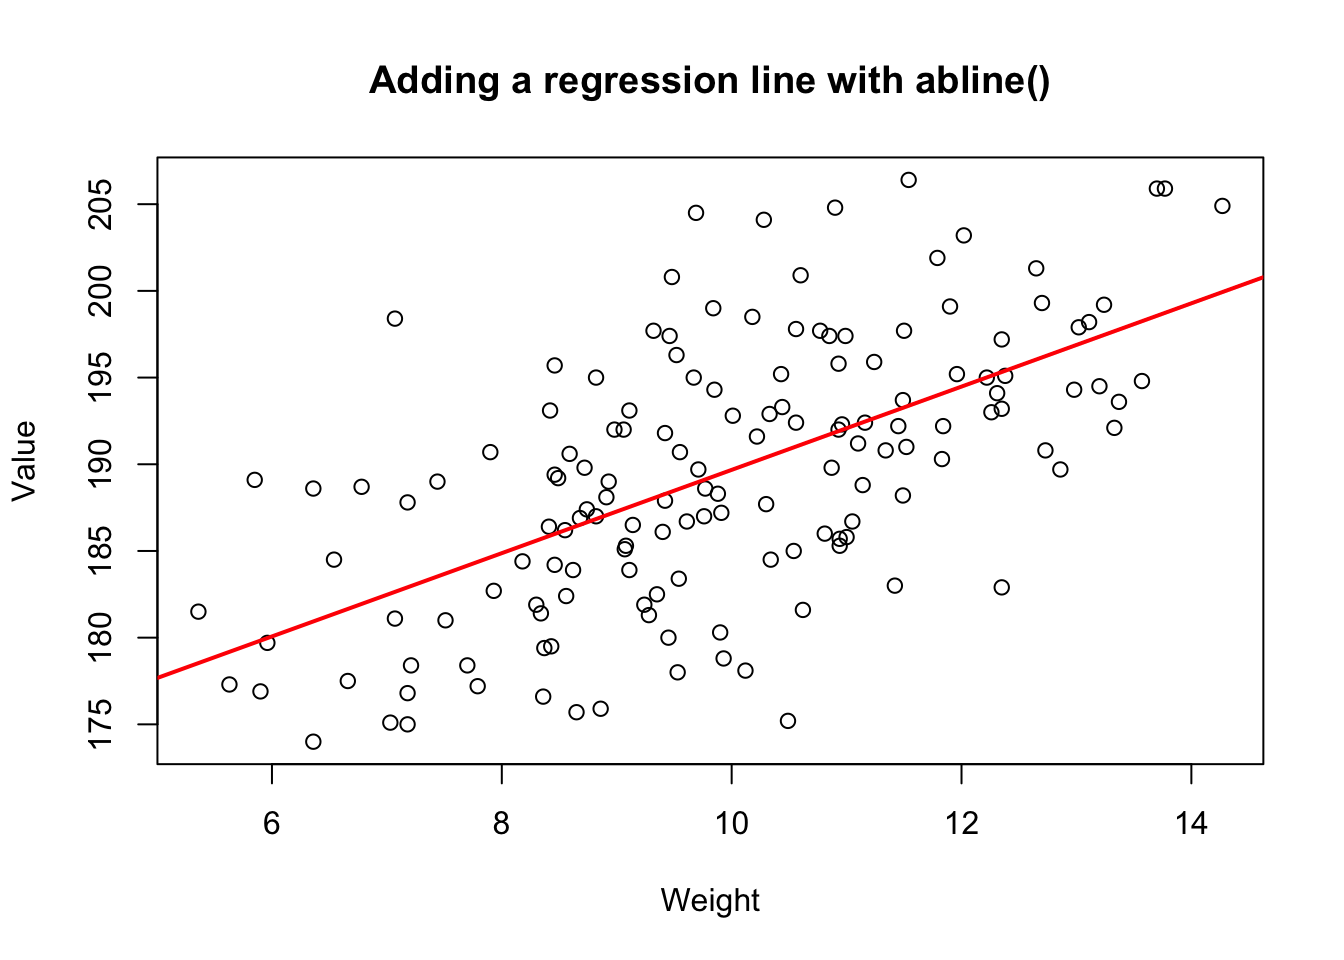 Adding a regression line to a scatterplot using abline()